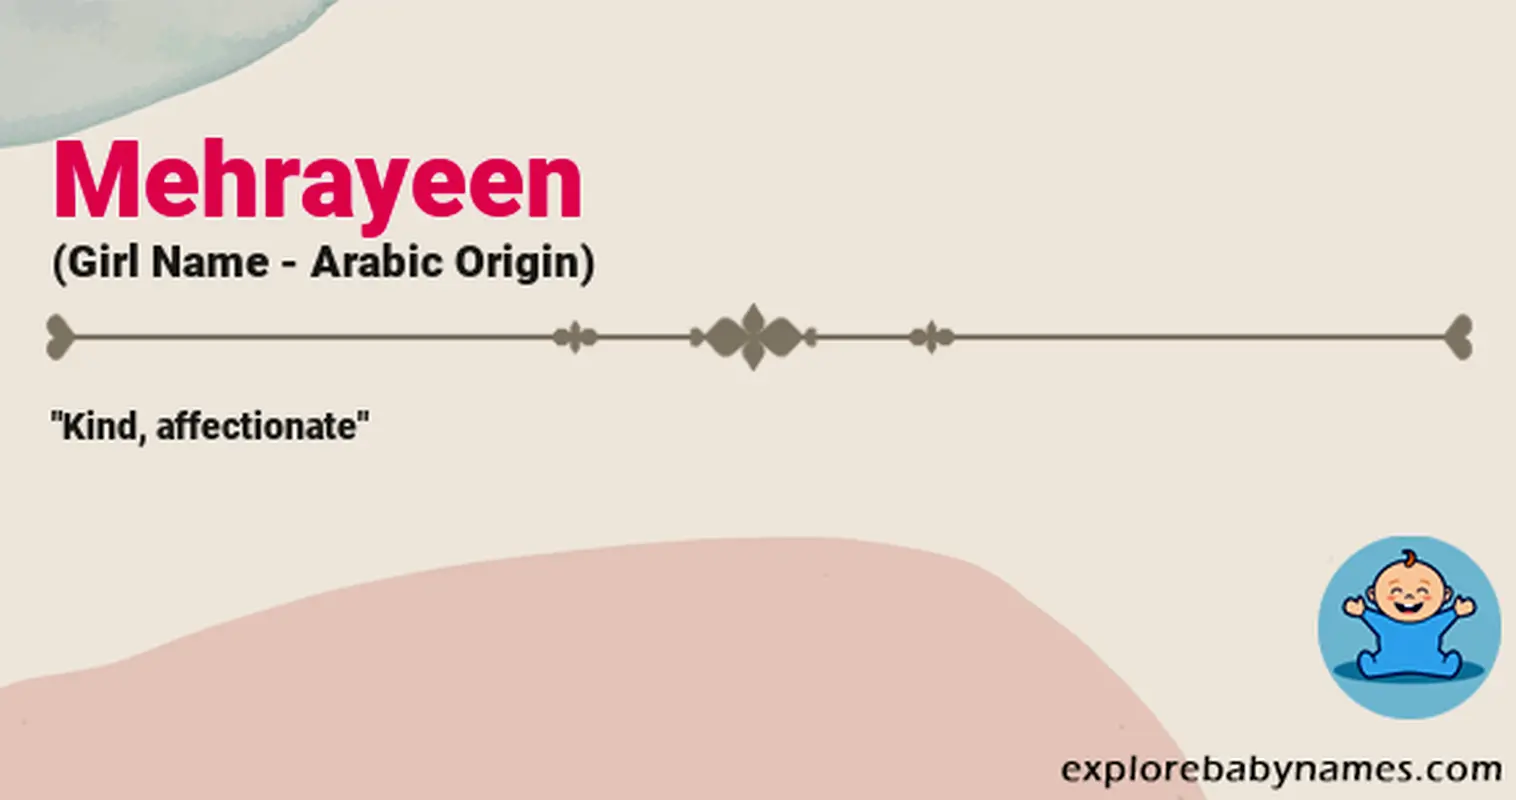 Meaning of Mehrayeen